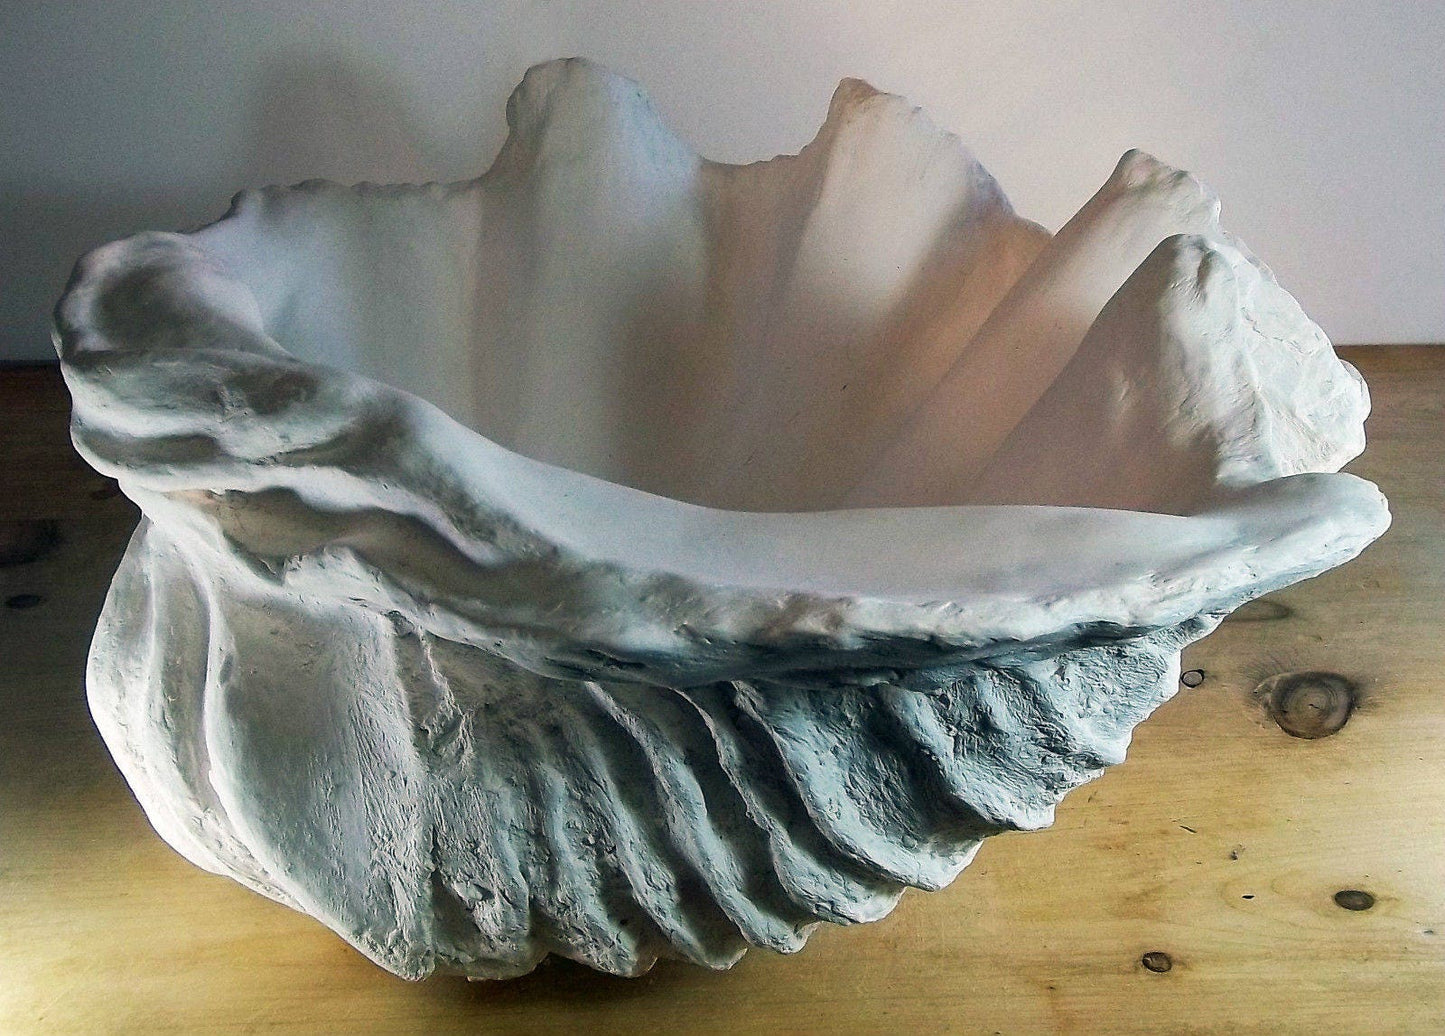 Extra Large Giant Clam Shell in White